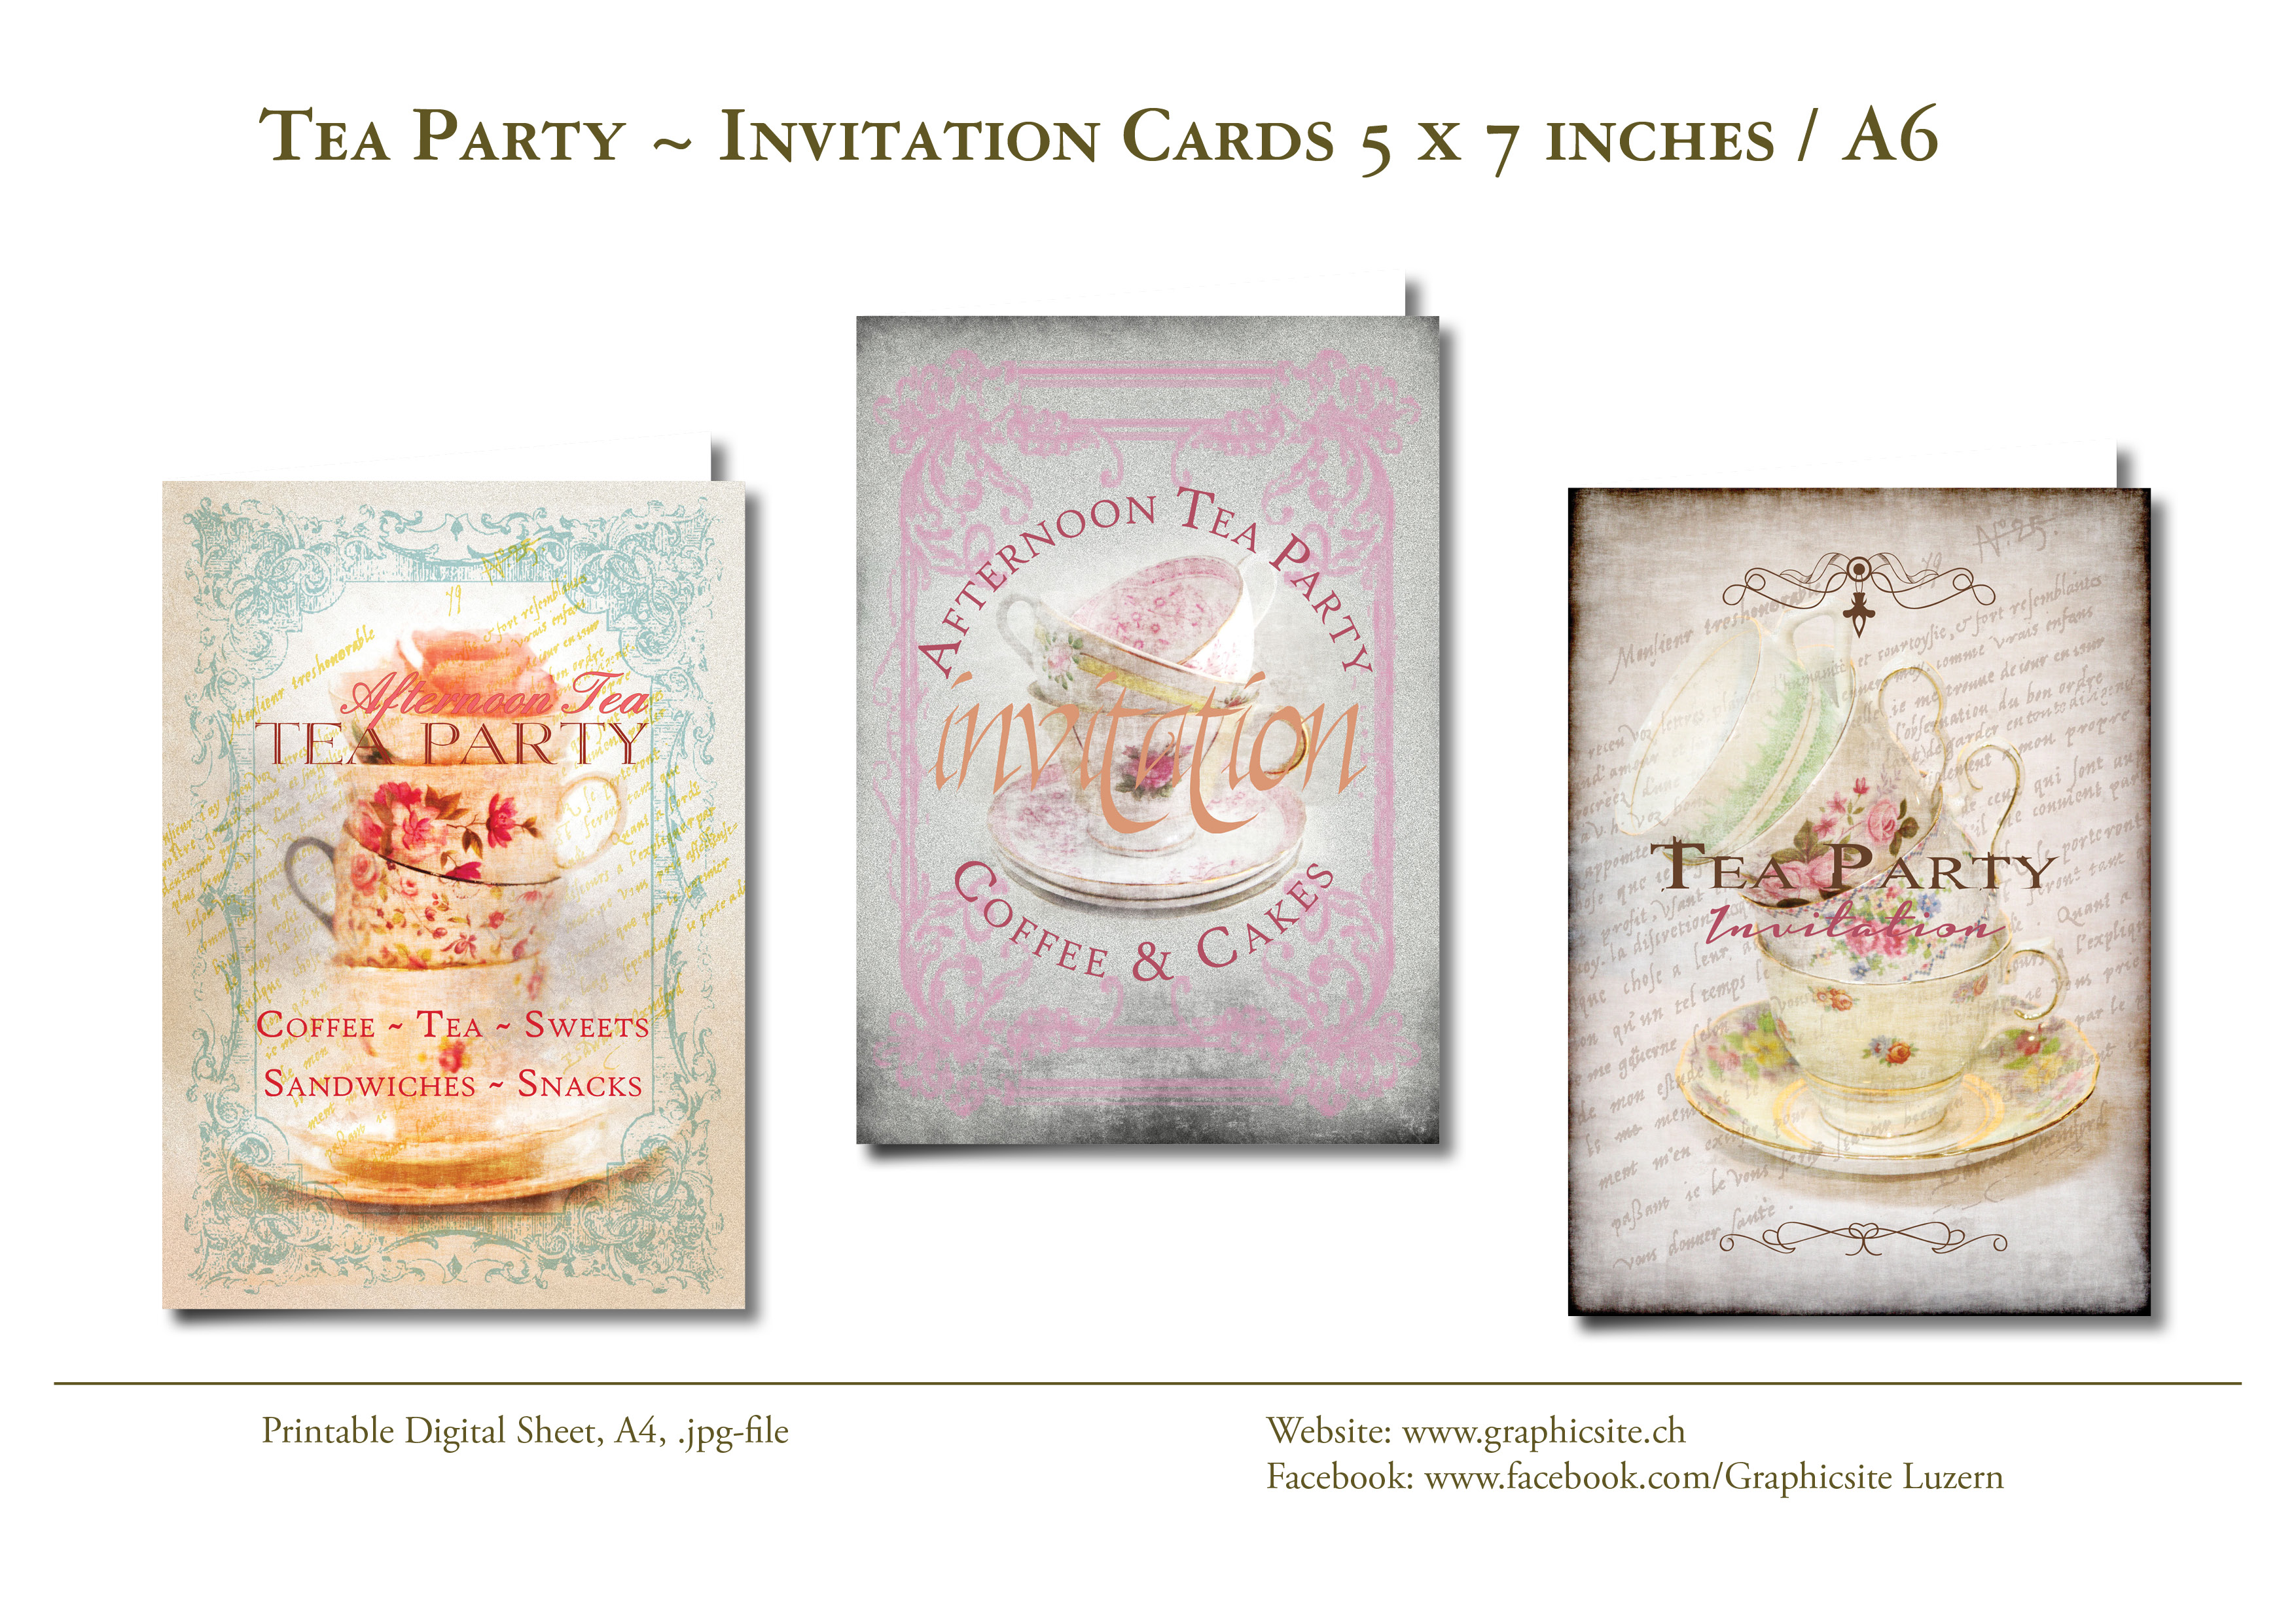 Printable Digital Sheets - DIY printing - Tea Party - #party, #invitation, #cards, #invites, #graphicdesign, #luzern, 